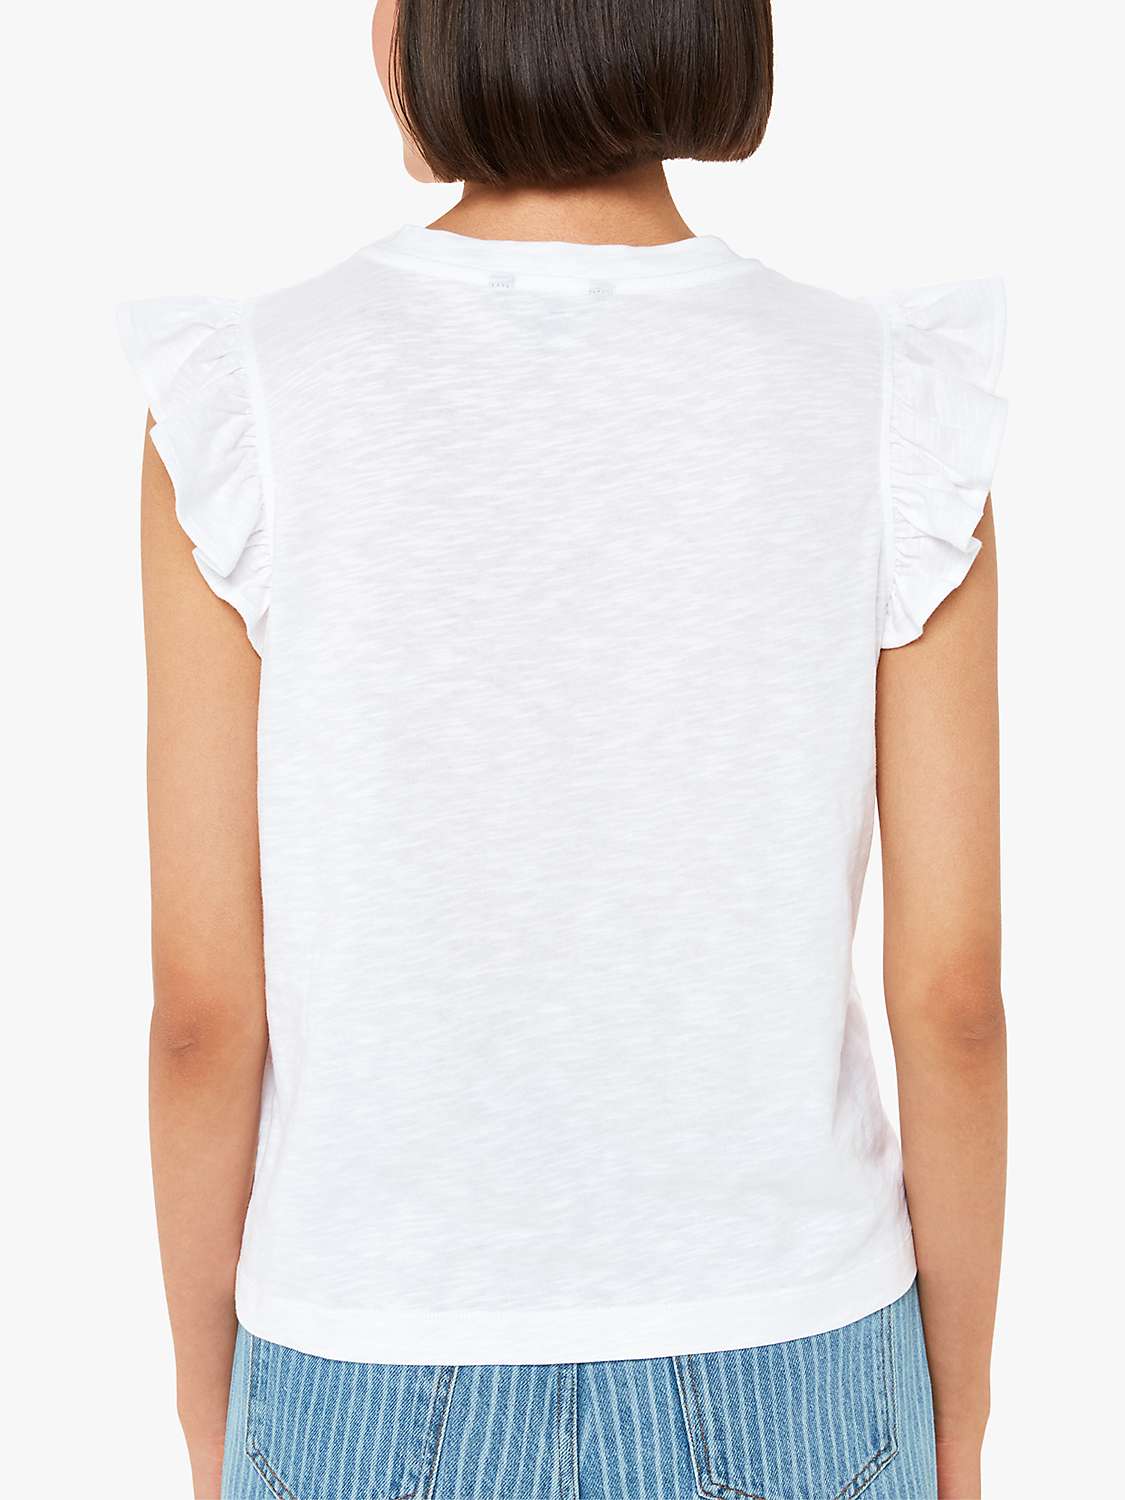 Buy Whistles Frill Cap Sleeve T-Shirt Online at johnlewis.com